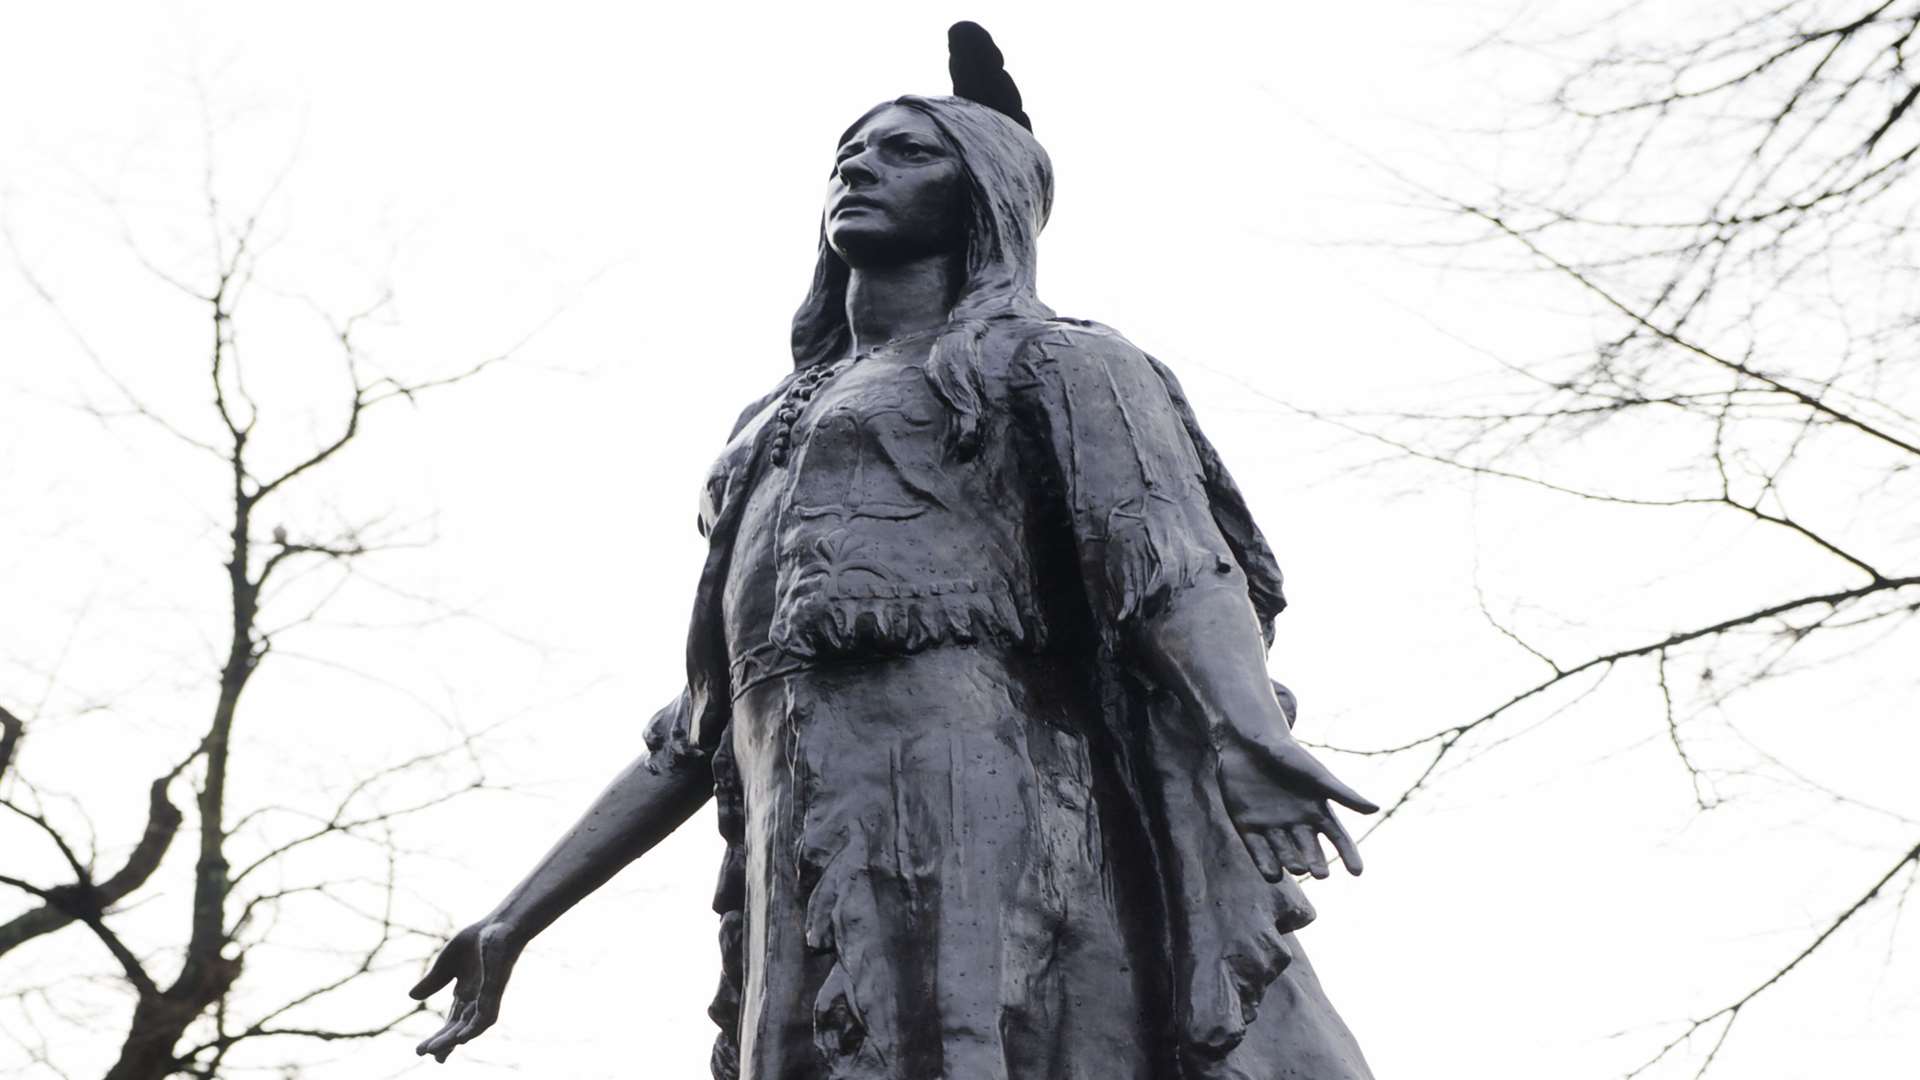 The statue of Pocahontas in Pocahontas Gardens, St George's Church, Gravesend